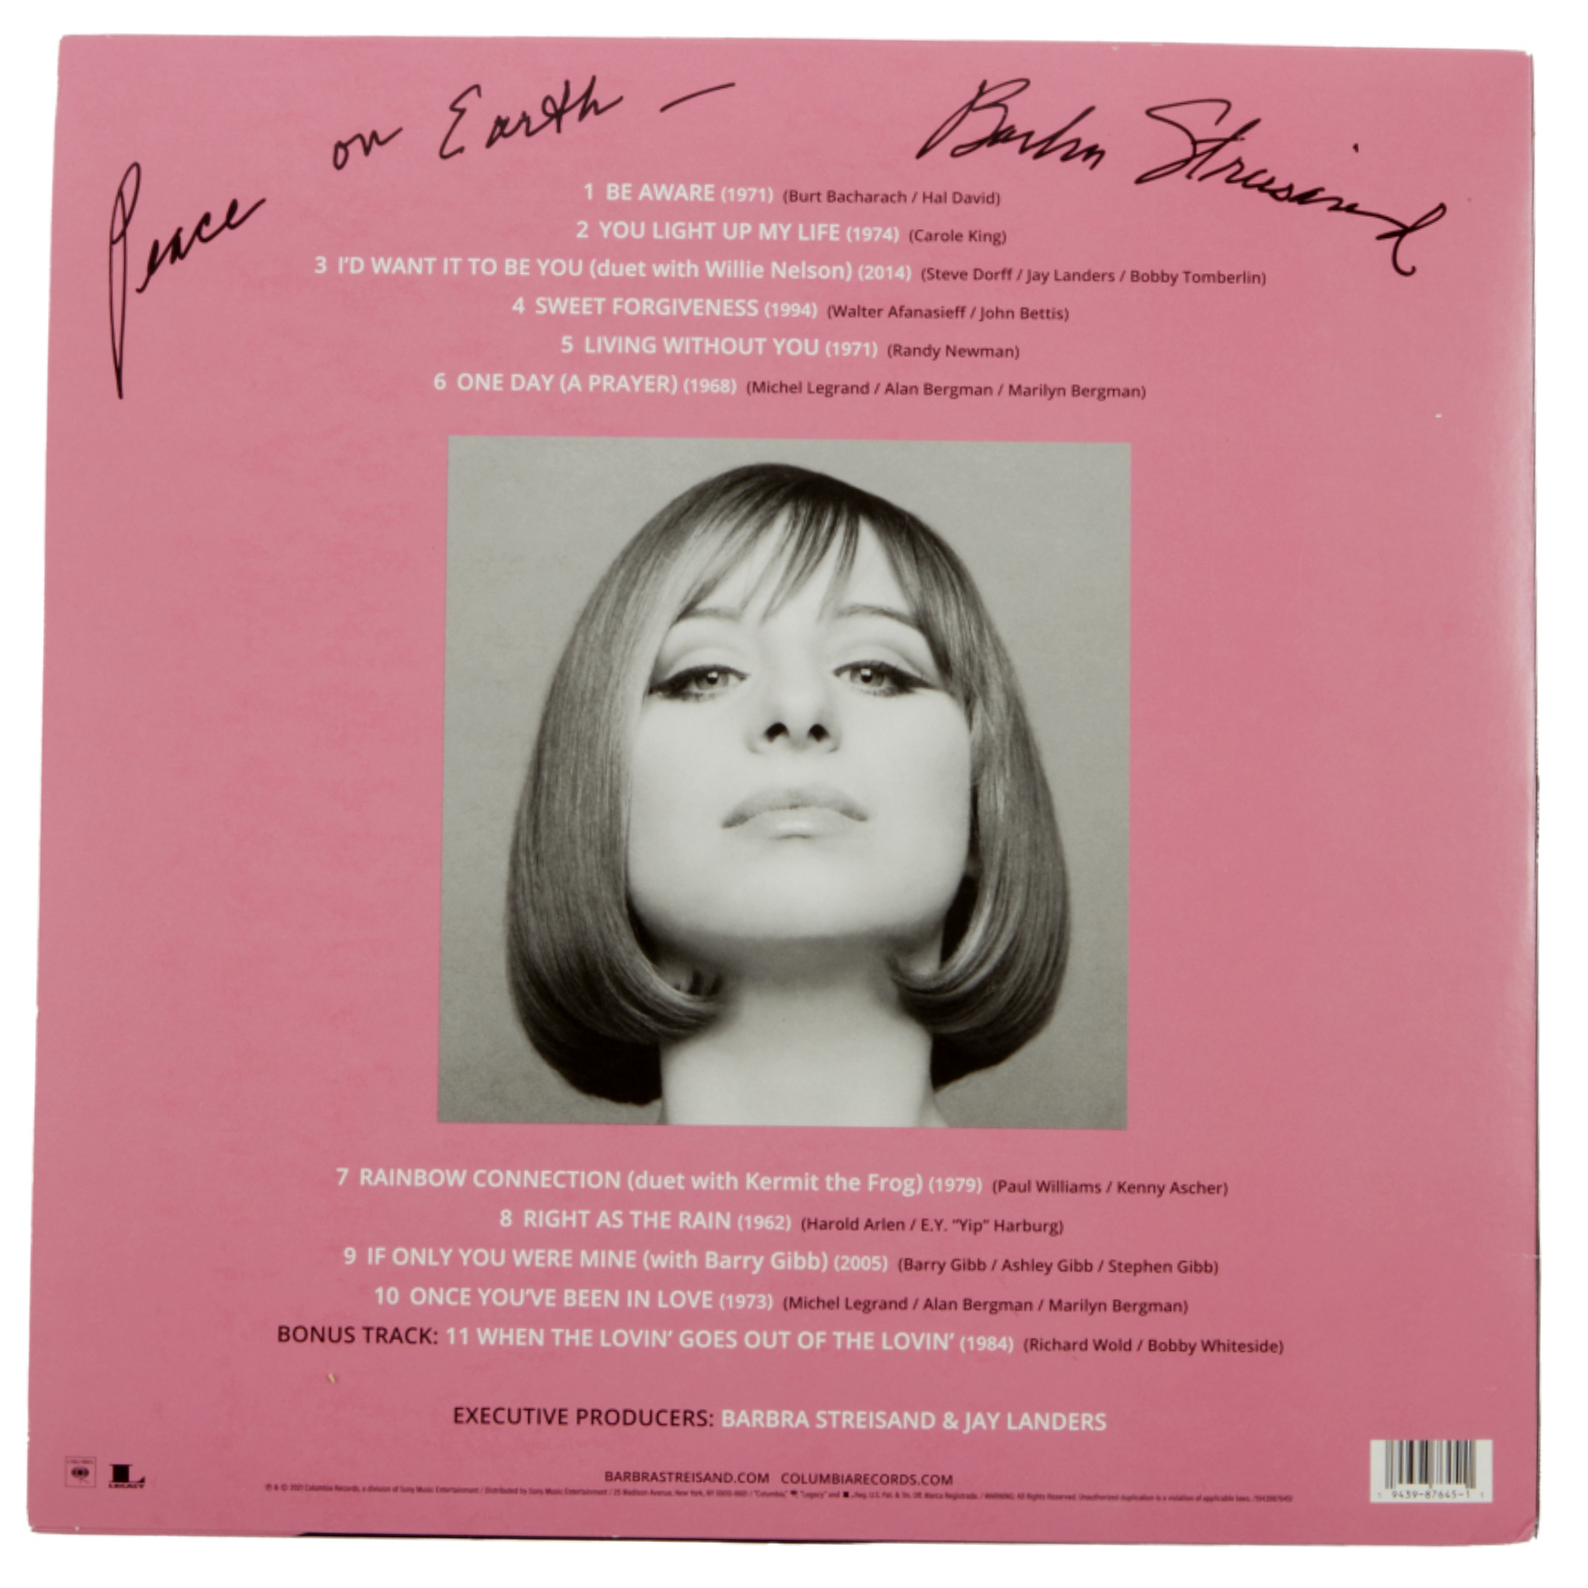 MusiCares signed album auction by Streisand